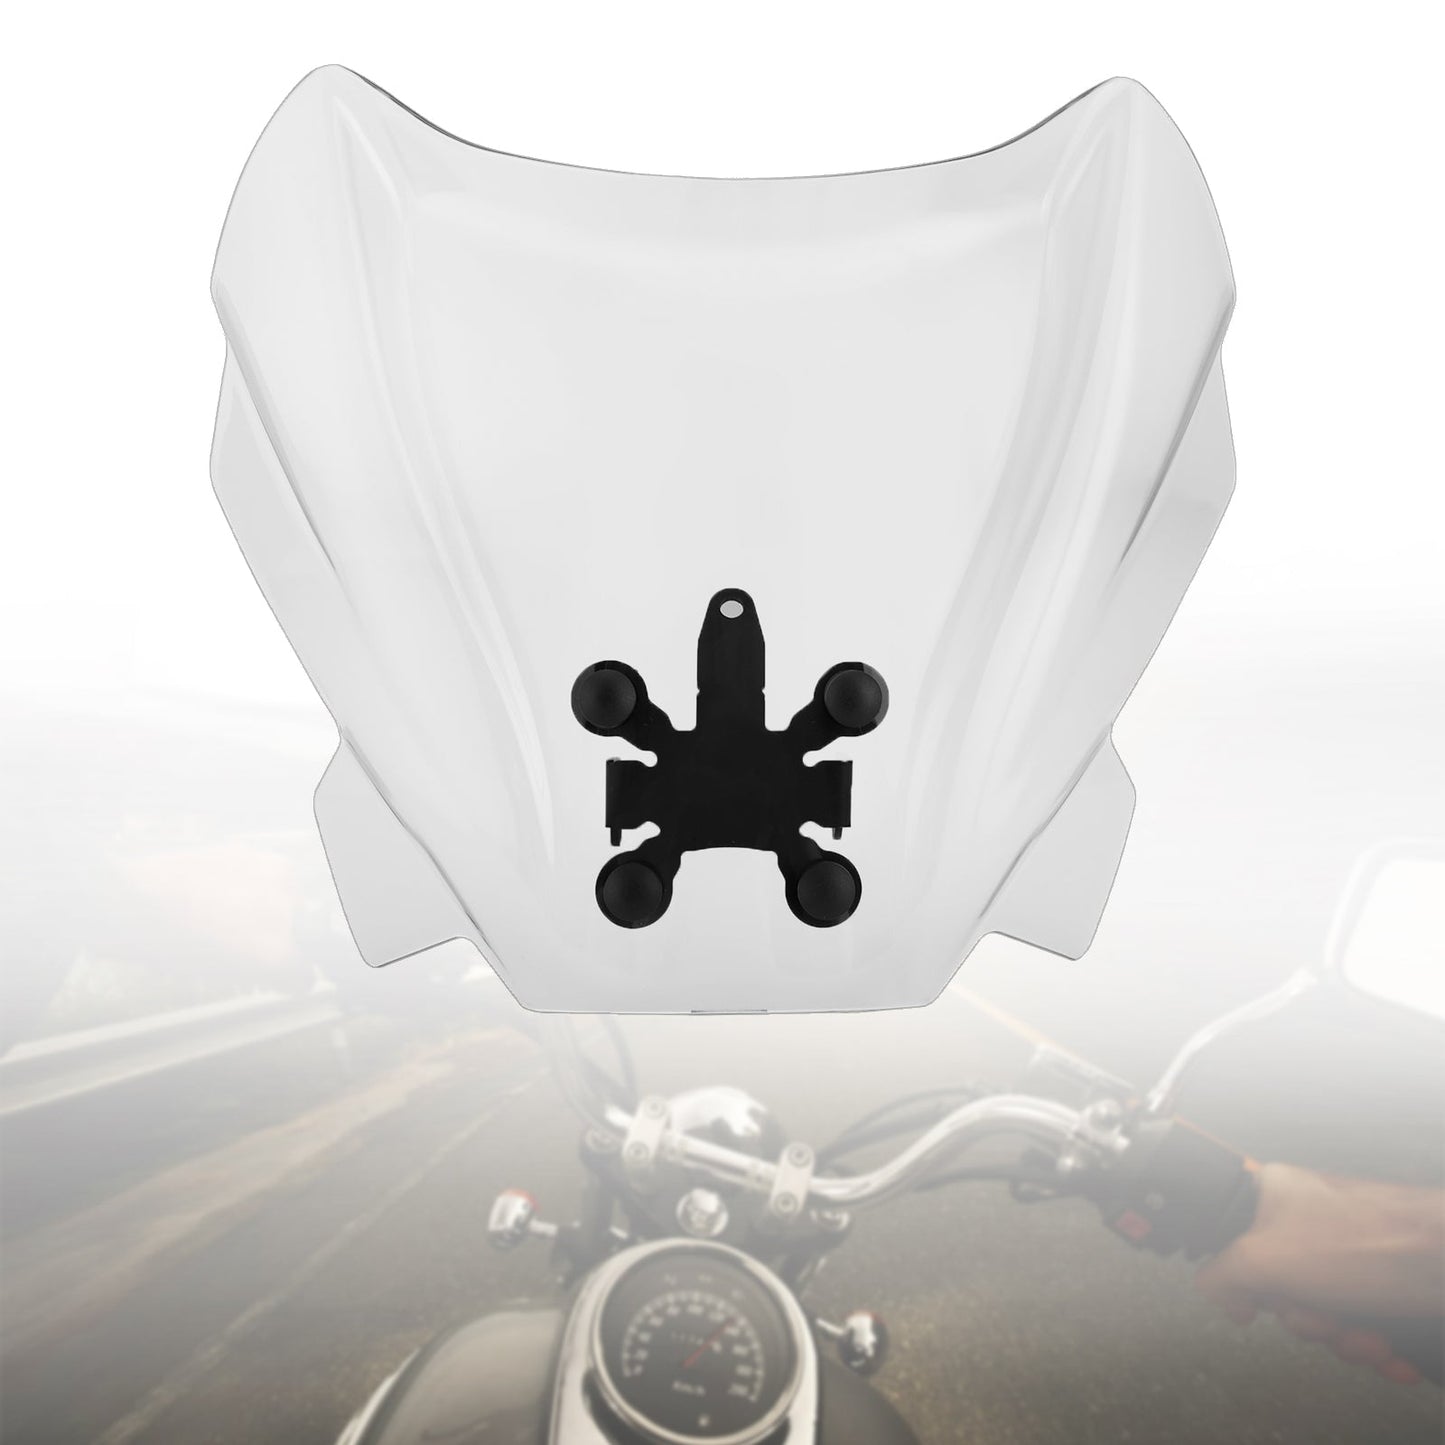 ABS Motorcycle Windshield WindScreen fit for HONDA CB650R 2019-2021